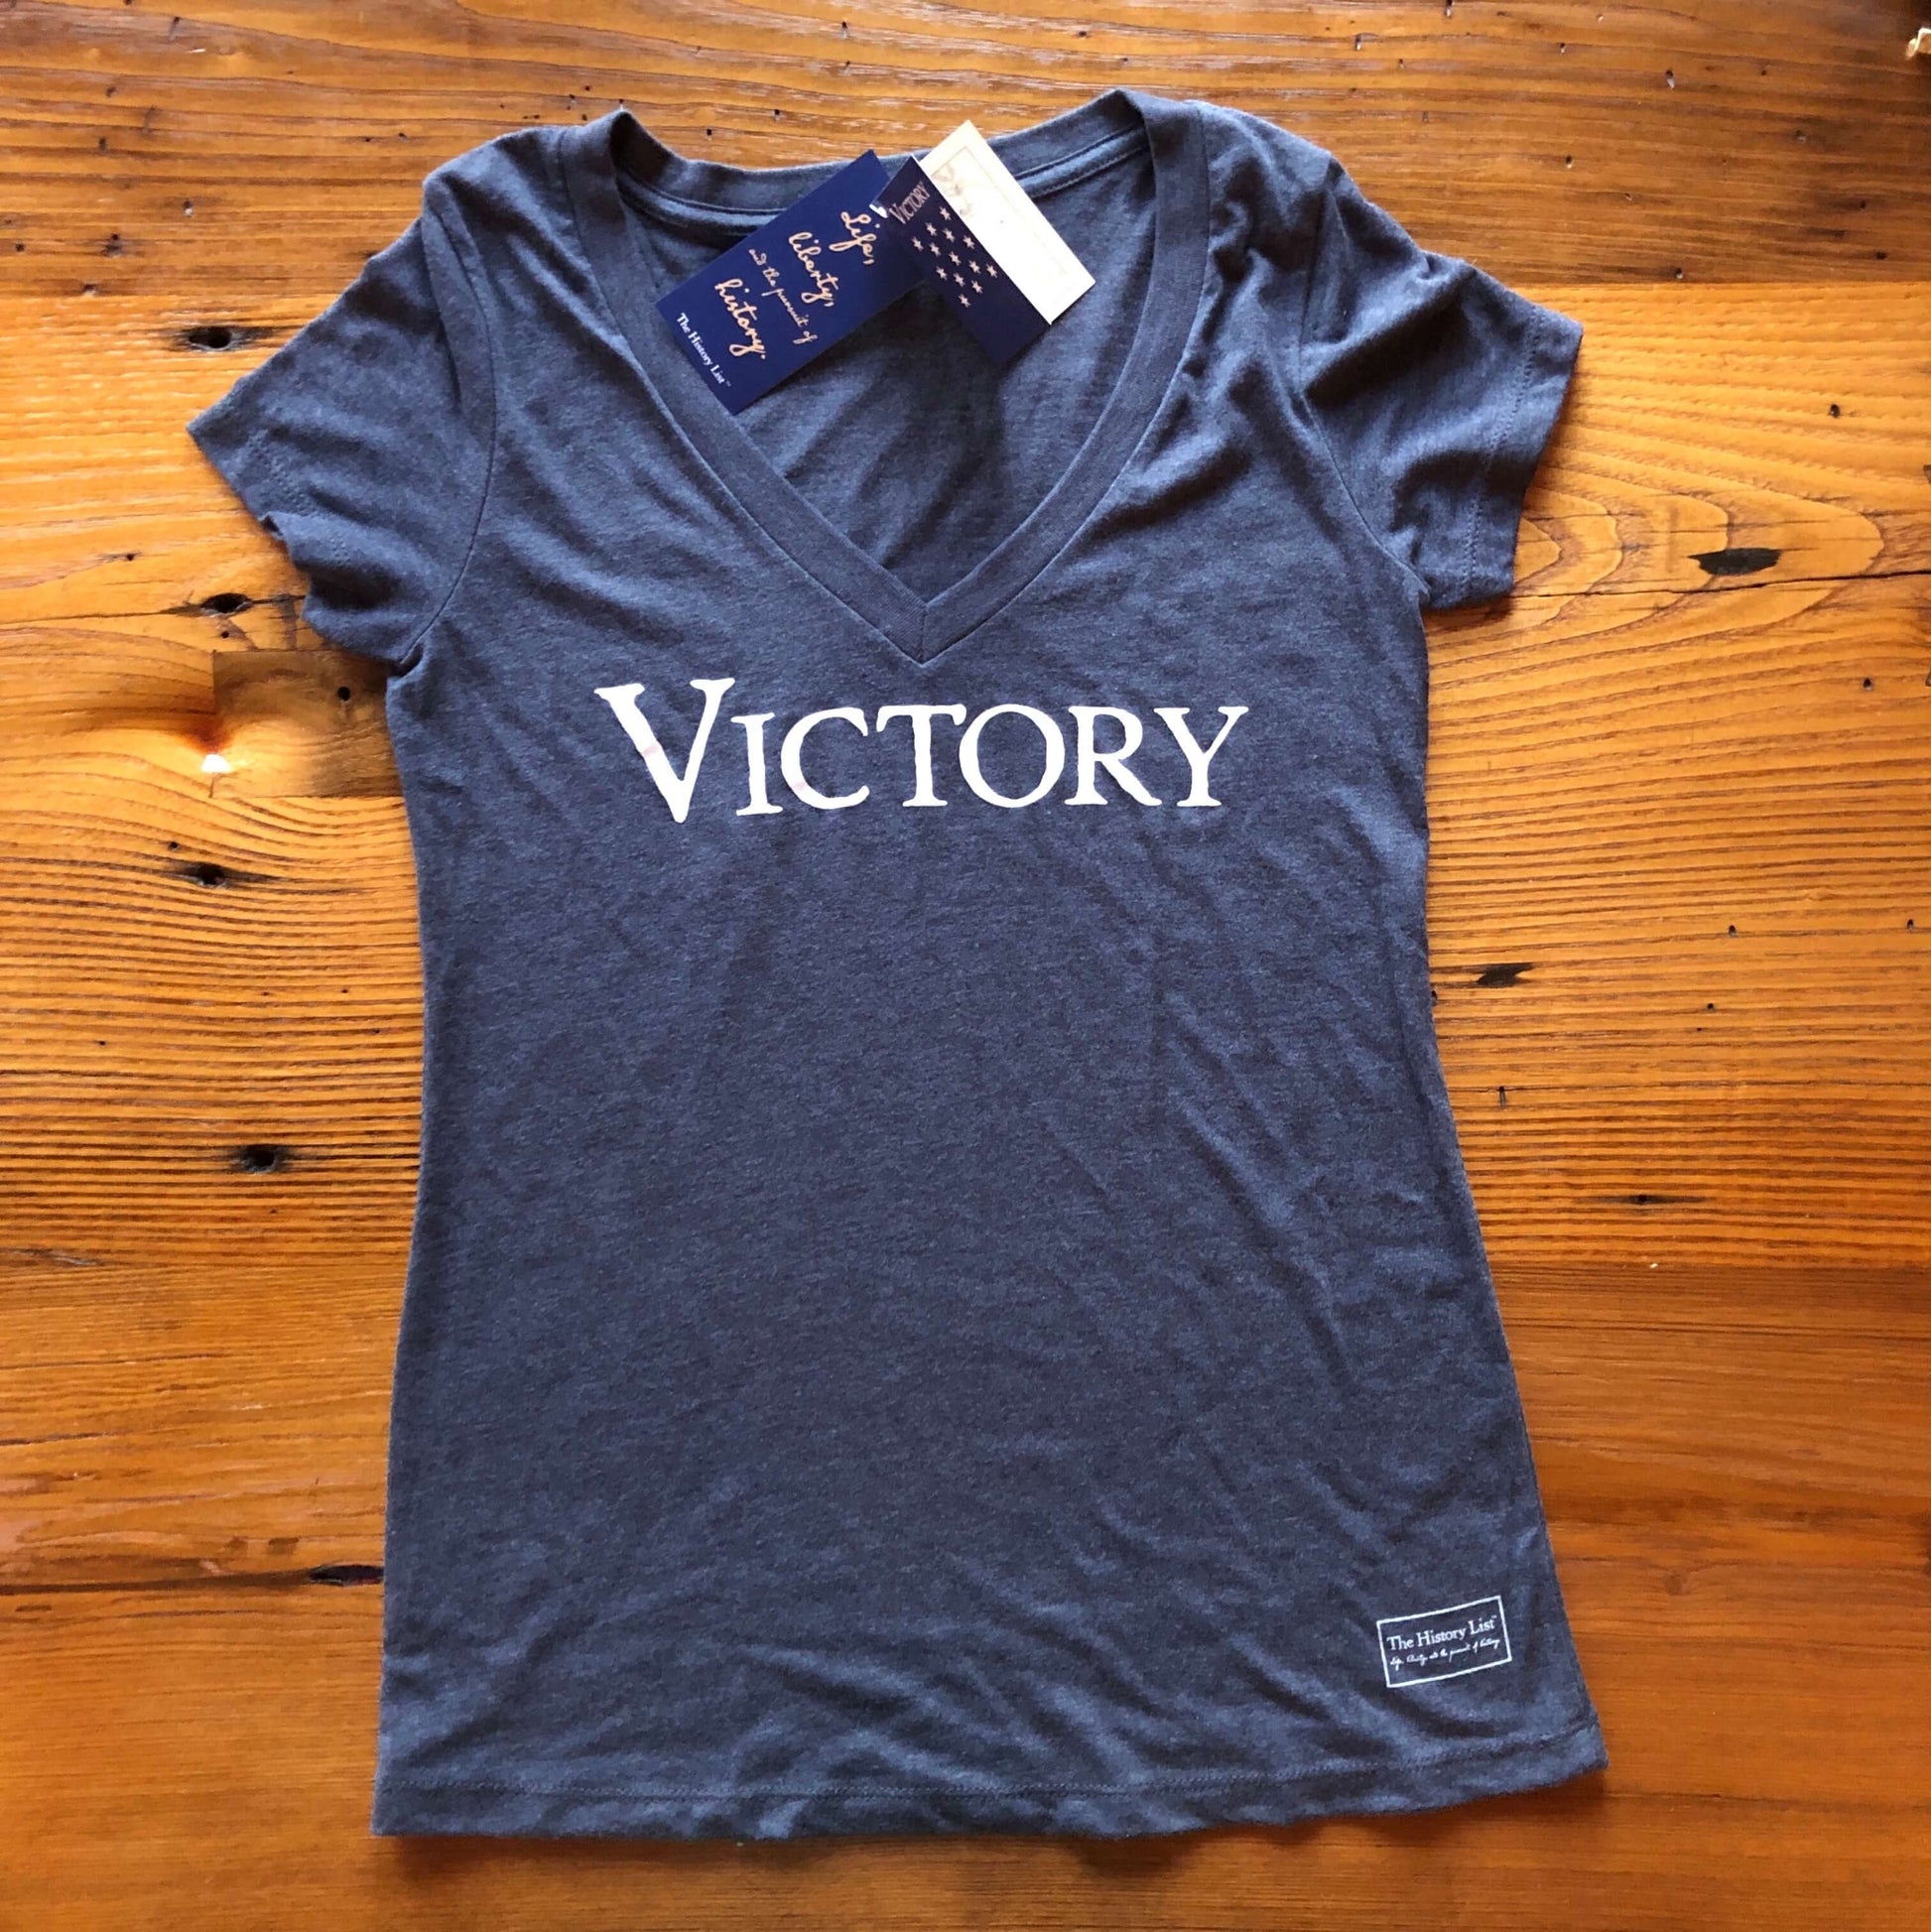 "Victory" V-neck shirt - Vintage navy from The History List Store